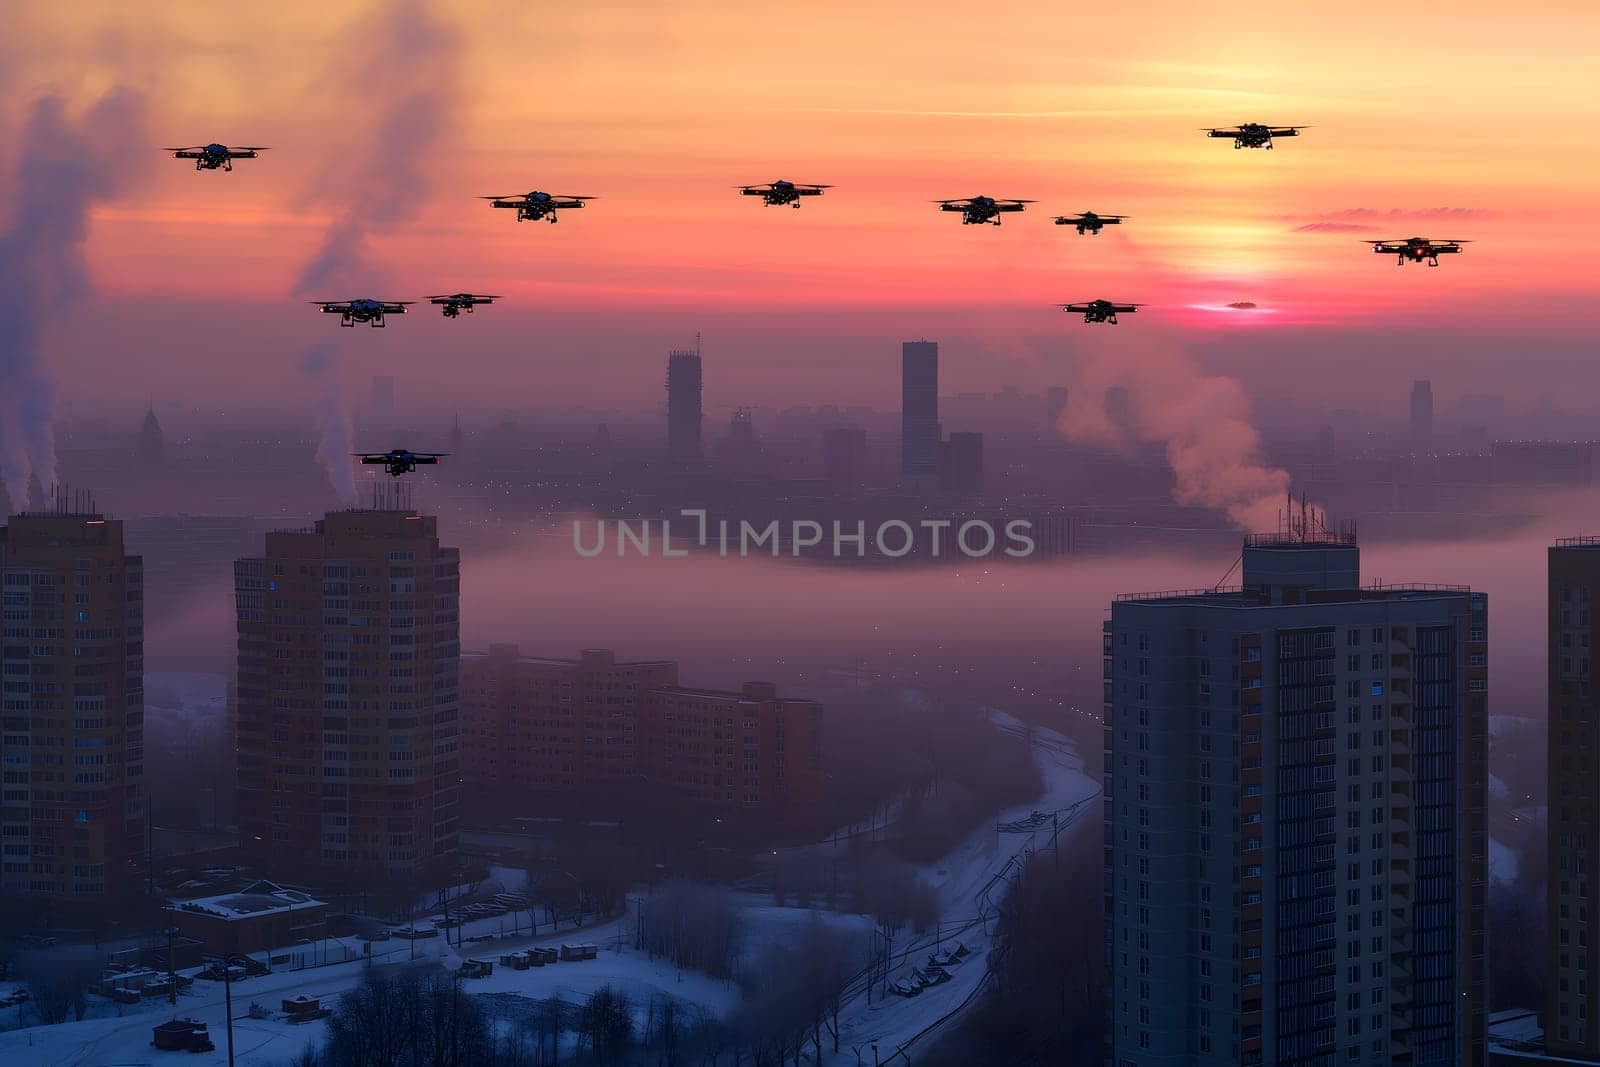 group of drones over city at winter sunset or sunrise by z1b